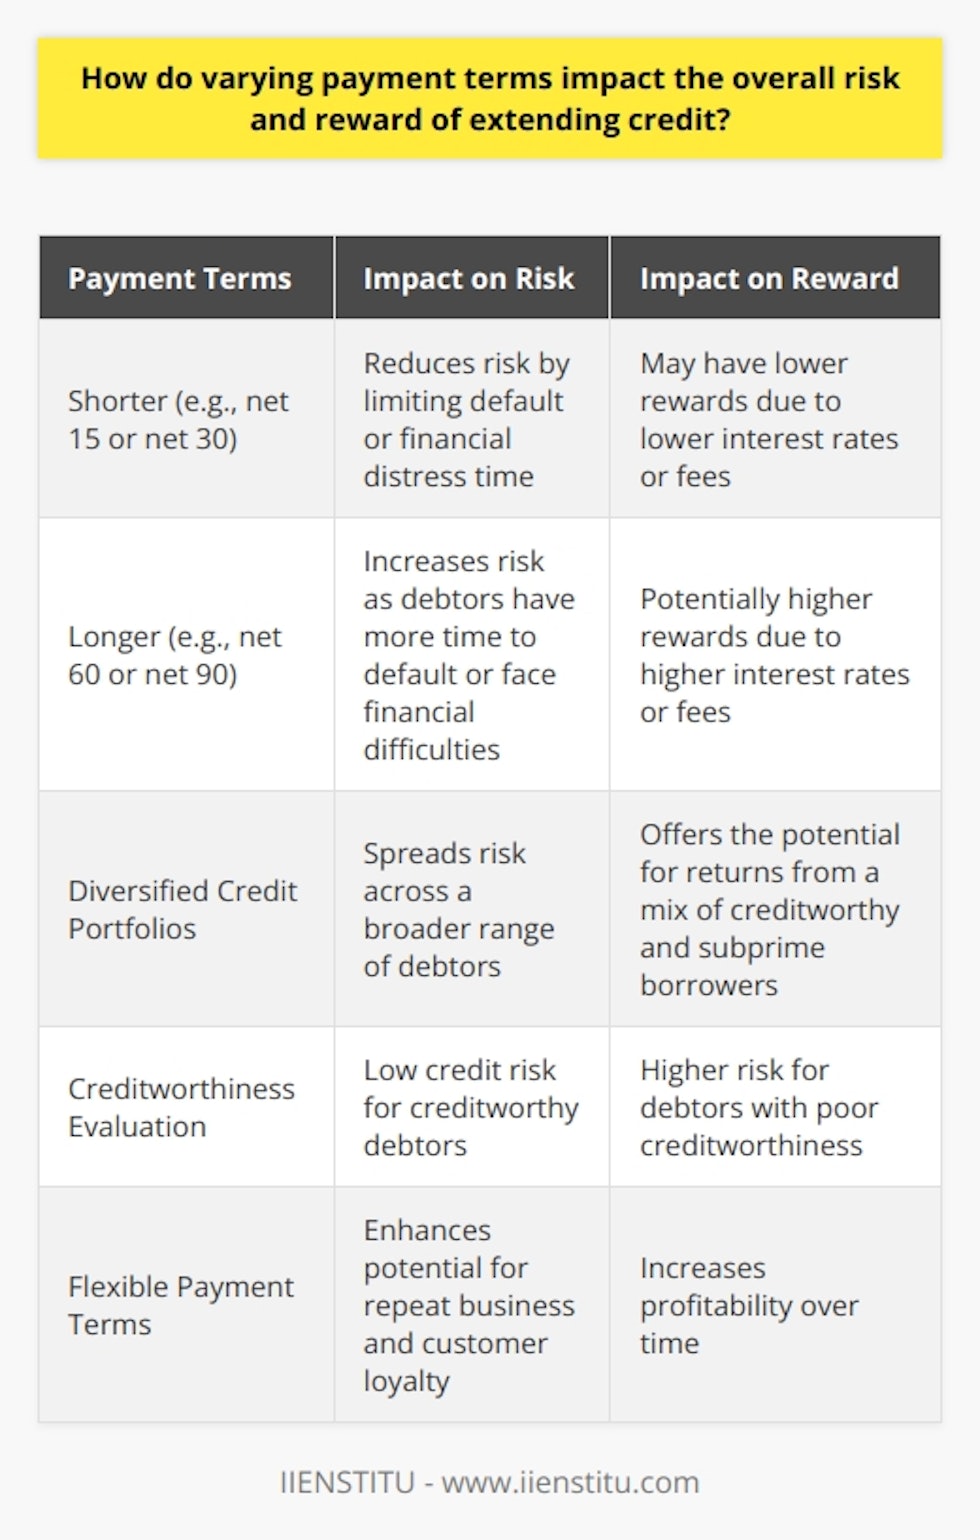 Varying payment terms can have a significant impact on the overall risk and reward associated with extending credit. Shorter payment terms, such as net 15 or net 30, reduce the risk by limiting the time for default or financial distress. On the other hand, longer payment terms, such as net 60 or 90, increase the risk as debtors have more time to potentially default or face financial difficulties.To assess the risk, it is important to evaluate a debtor's creditworthiness. This involves reviewing their financial history, including credit scores, payment patterns, and overall debt levels. Creditworthy debtors, who are likely to meet their financial obligations even in unfavorable circumstances, pose a lower risk of default or late payments. Debtors with poor creditworthiness, on the other hand, pose a higher risk.Diversifying credit portfolios is another approach to mitigate risk and explore the benefits of extending credit. By offering credit in different segments of the market, the risk of default can be spread across a broader range of debtors. This helps in balancing risk exposure and allows the potential for returns from a mix of creditworthy and subprime borrowers.The rewards associated with extending credit increase when offering longer payment terms. Longer terms often come with higher interest rates or fees, which helps to offset the risk. This can boost overall returns for creditors. Additionally, offering flexible payment terms can lead to repeat business and build a loyal customer base, thereby increasing profitability over time.In conclusion, varying payment terms present a trade-off between risk and reward when extending credit. Shorter terms reduce risk, while longer terms may generate higher rewards. It is important for credit providers to evaluate the creditworthiness of debtors and diversify credit portfolios to manage risks effectively. By offering flexible payment terms and implementing a robust risk management strategy, the overall profitability of extending credit can be enhanced.